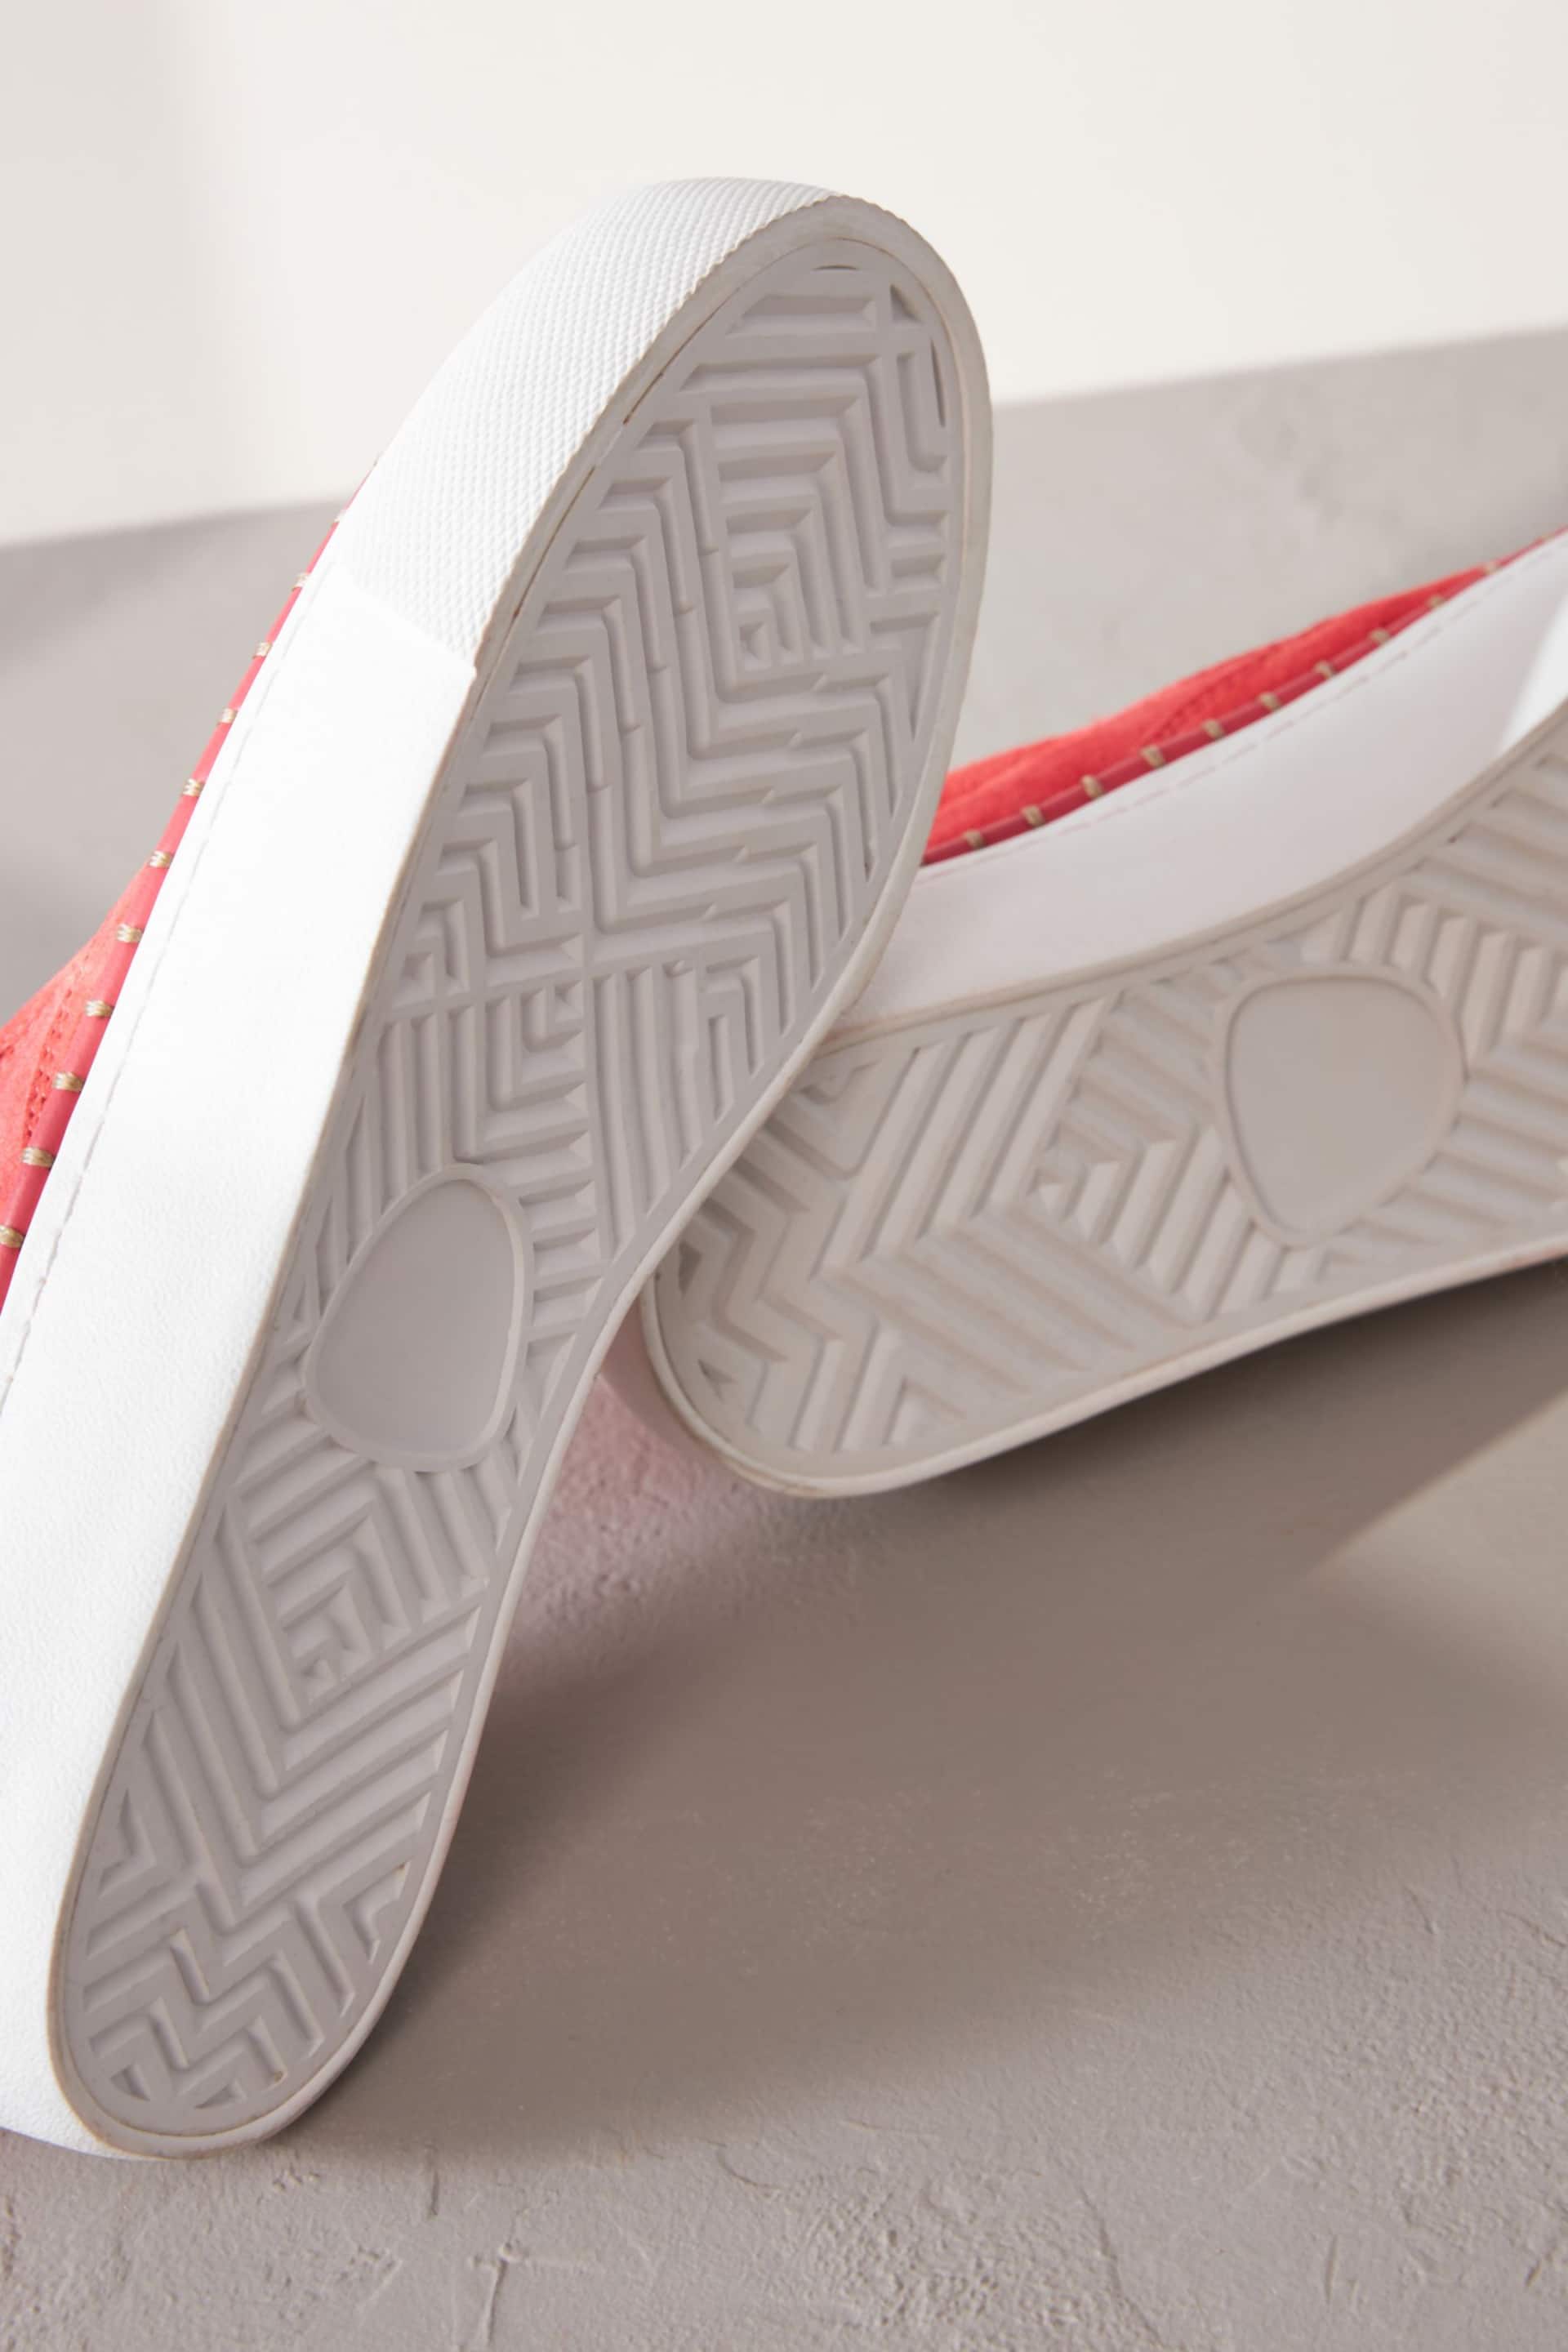 Coral/White Signature Leather Rand Stitch Detail Slip-Ons Trainers - Image 6 of 6